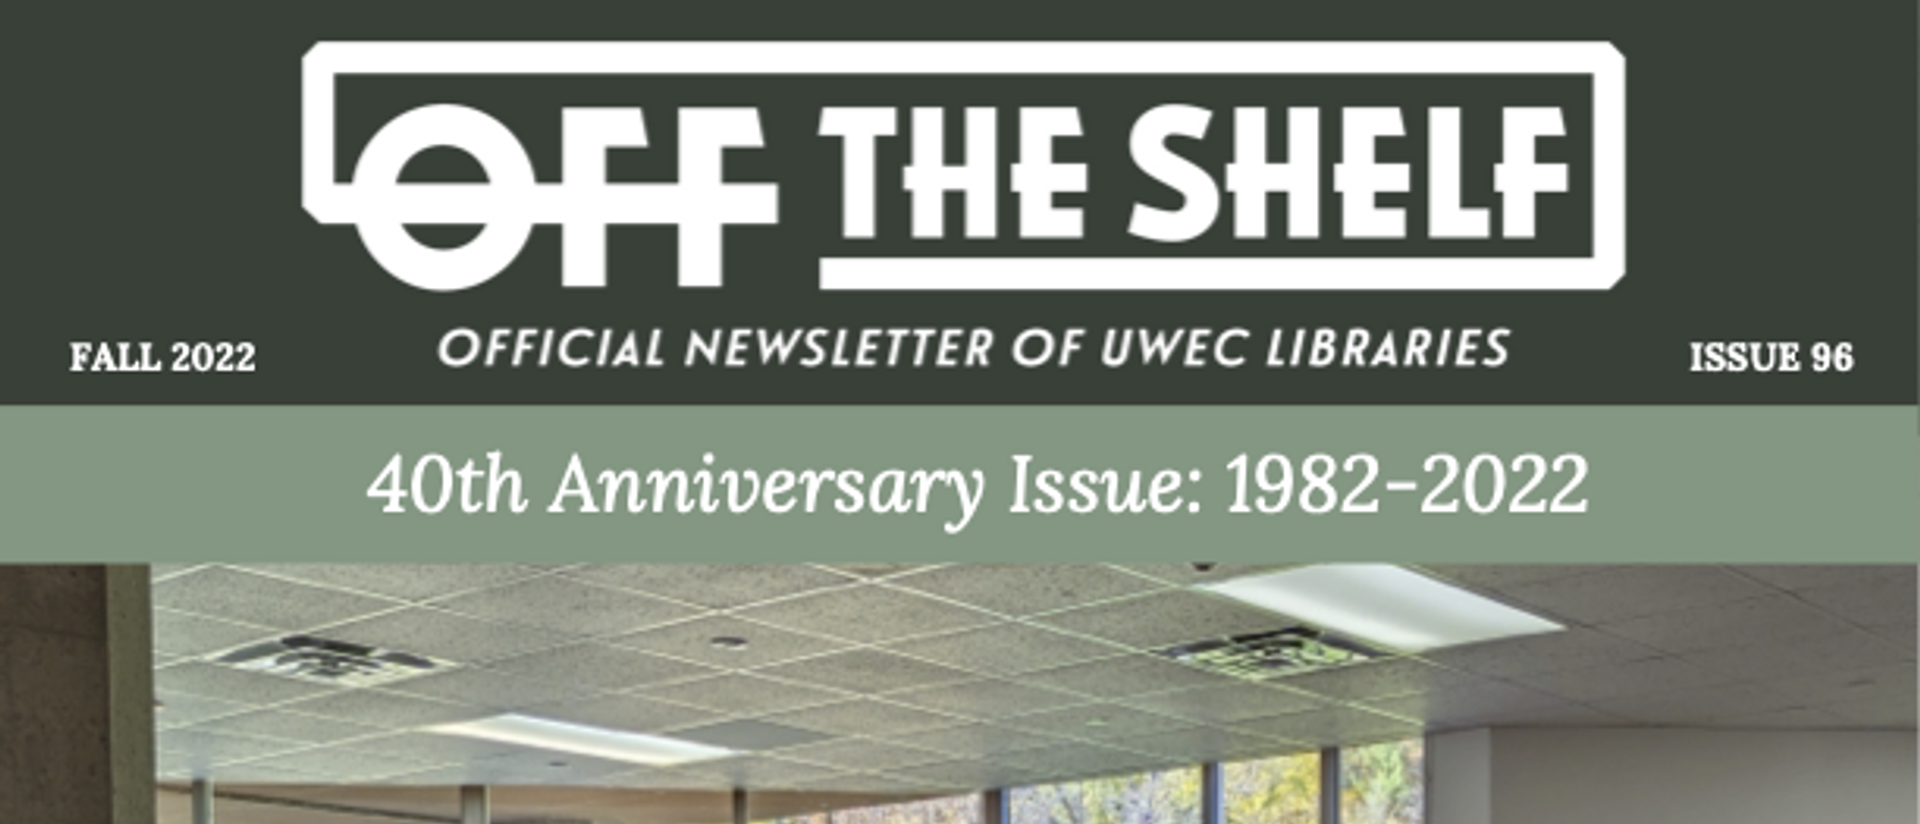 Cover of Off the Shelf newsletter